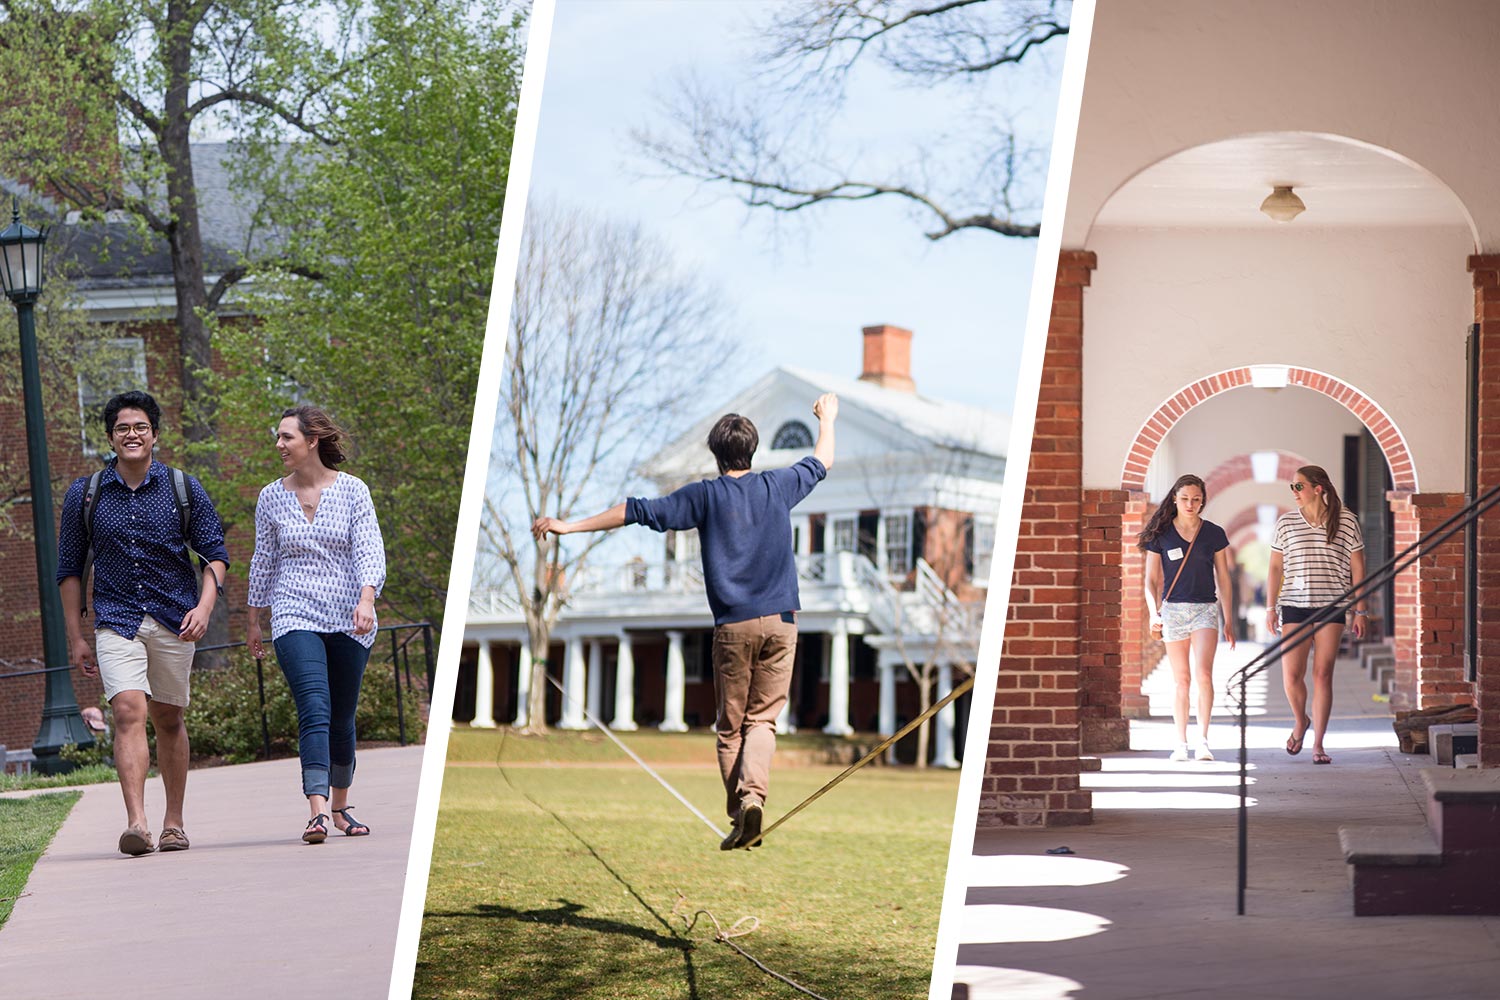 Left: students walking on sidewalk Middle: man walking on a tight rope on the Lawn Right: students walking on a sidewalk